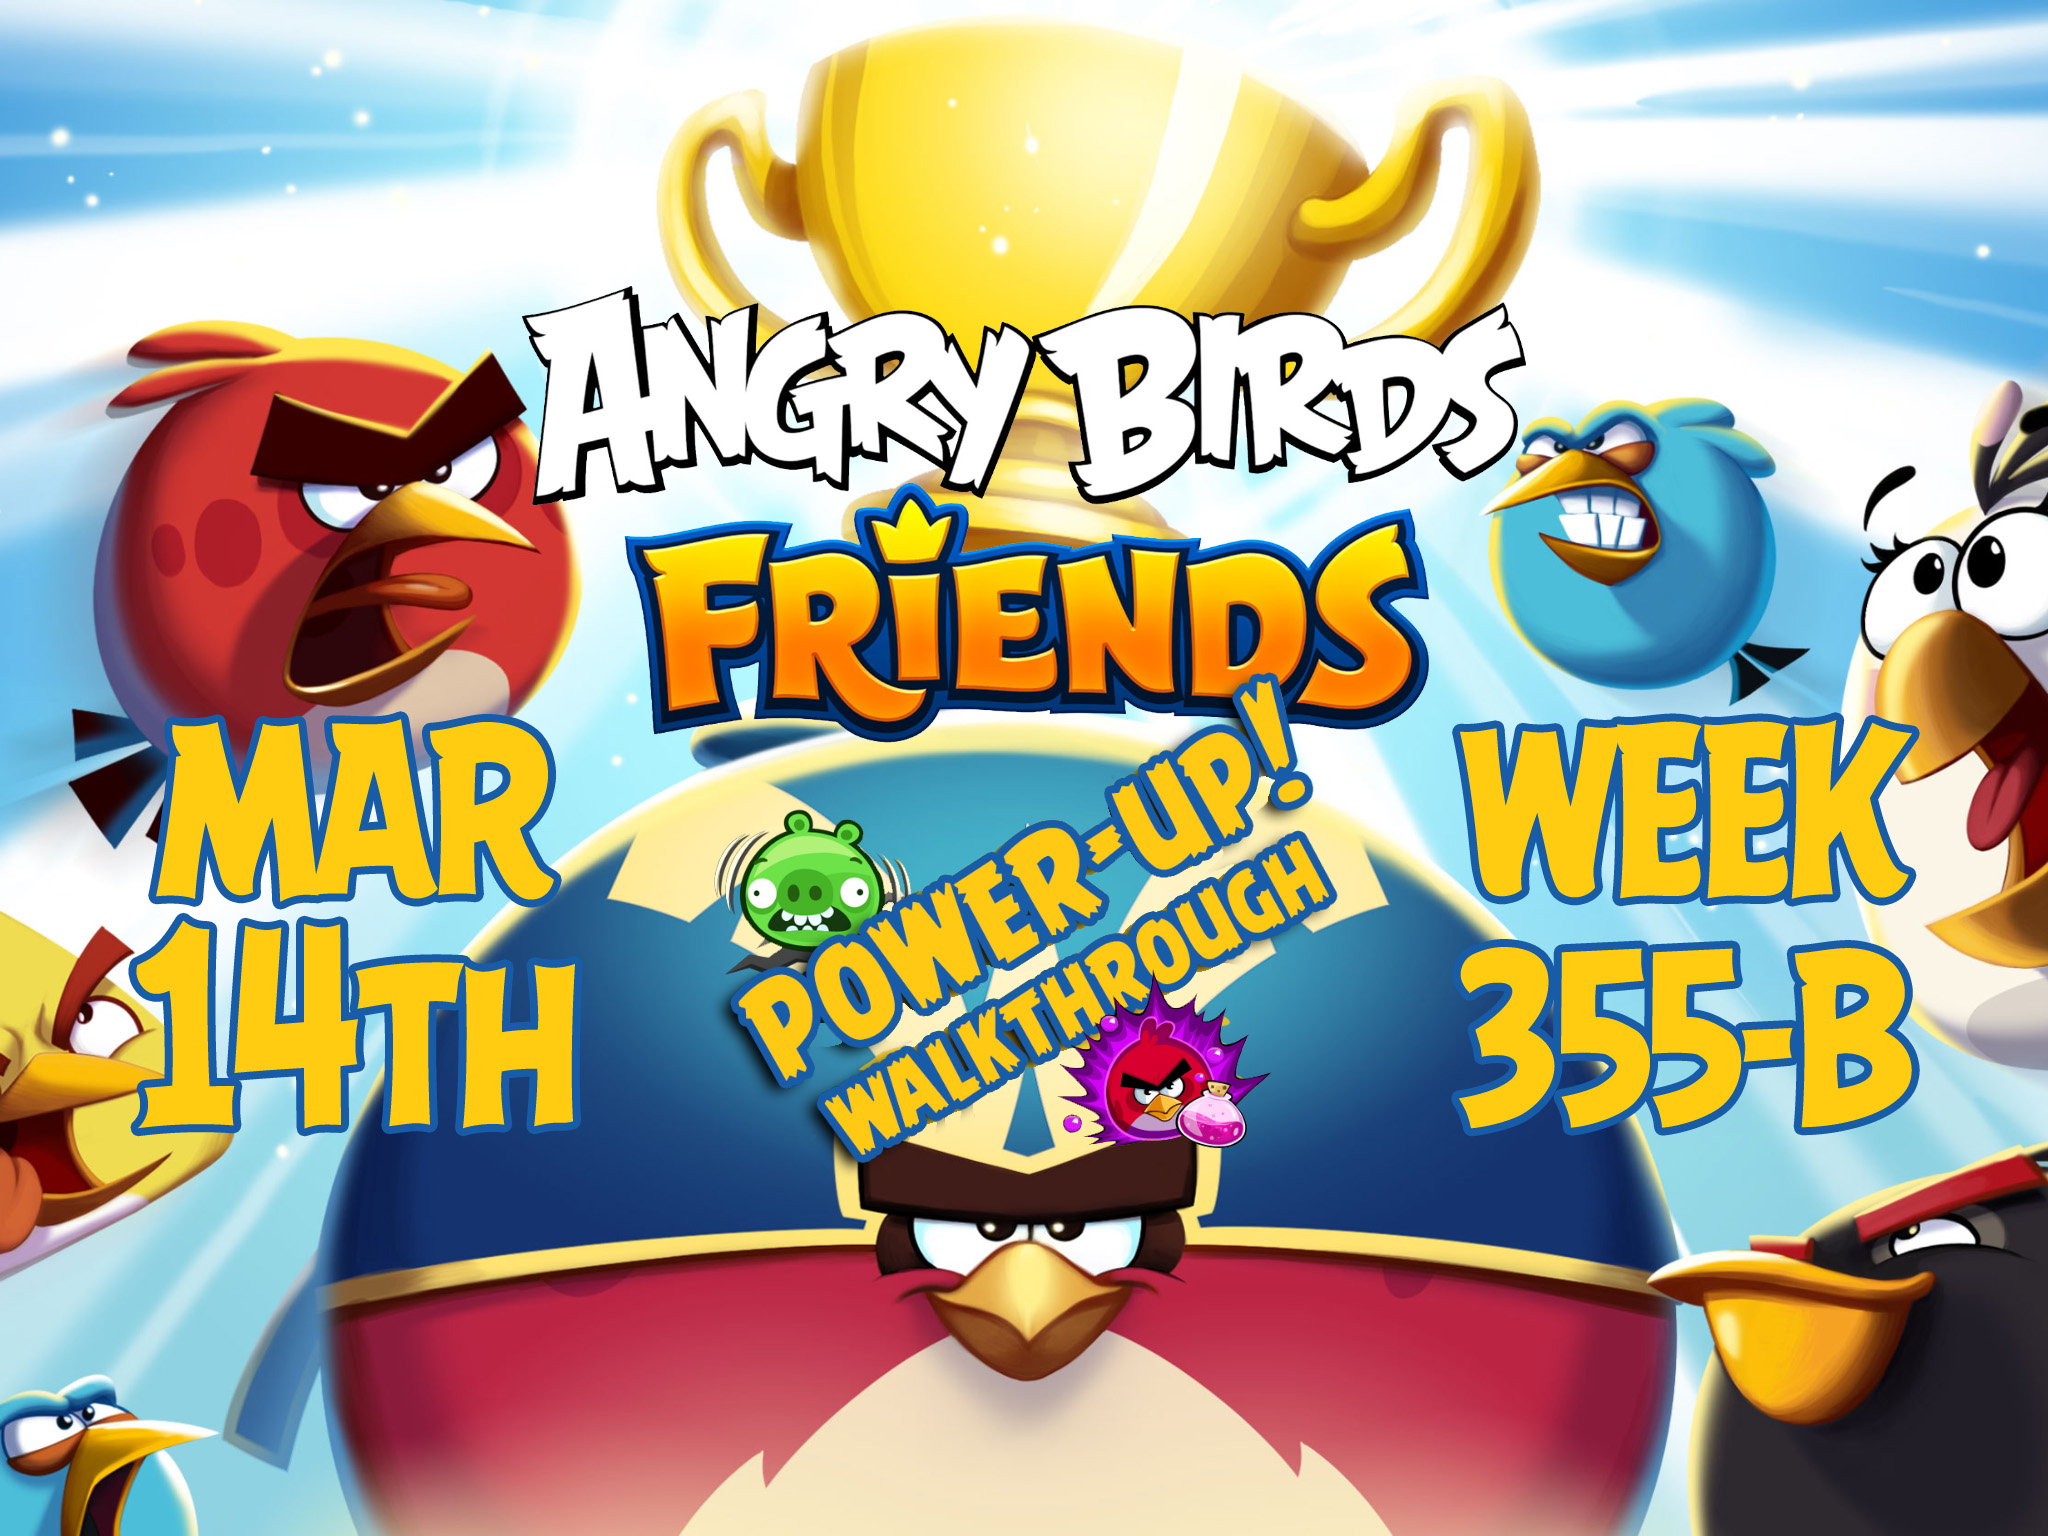 Angry-Birds-Friends-Tournament-Week-355-B-Feature-Image-PU